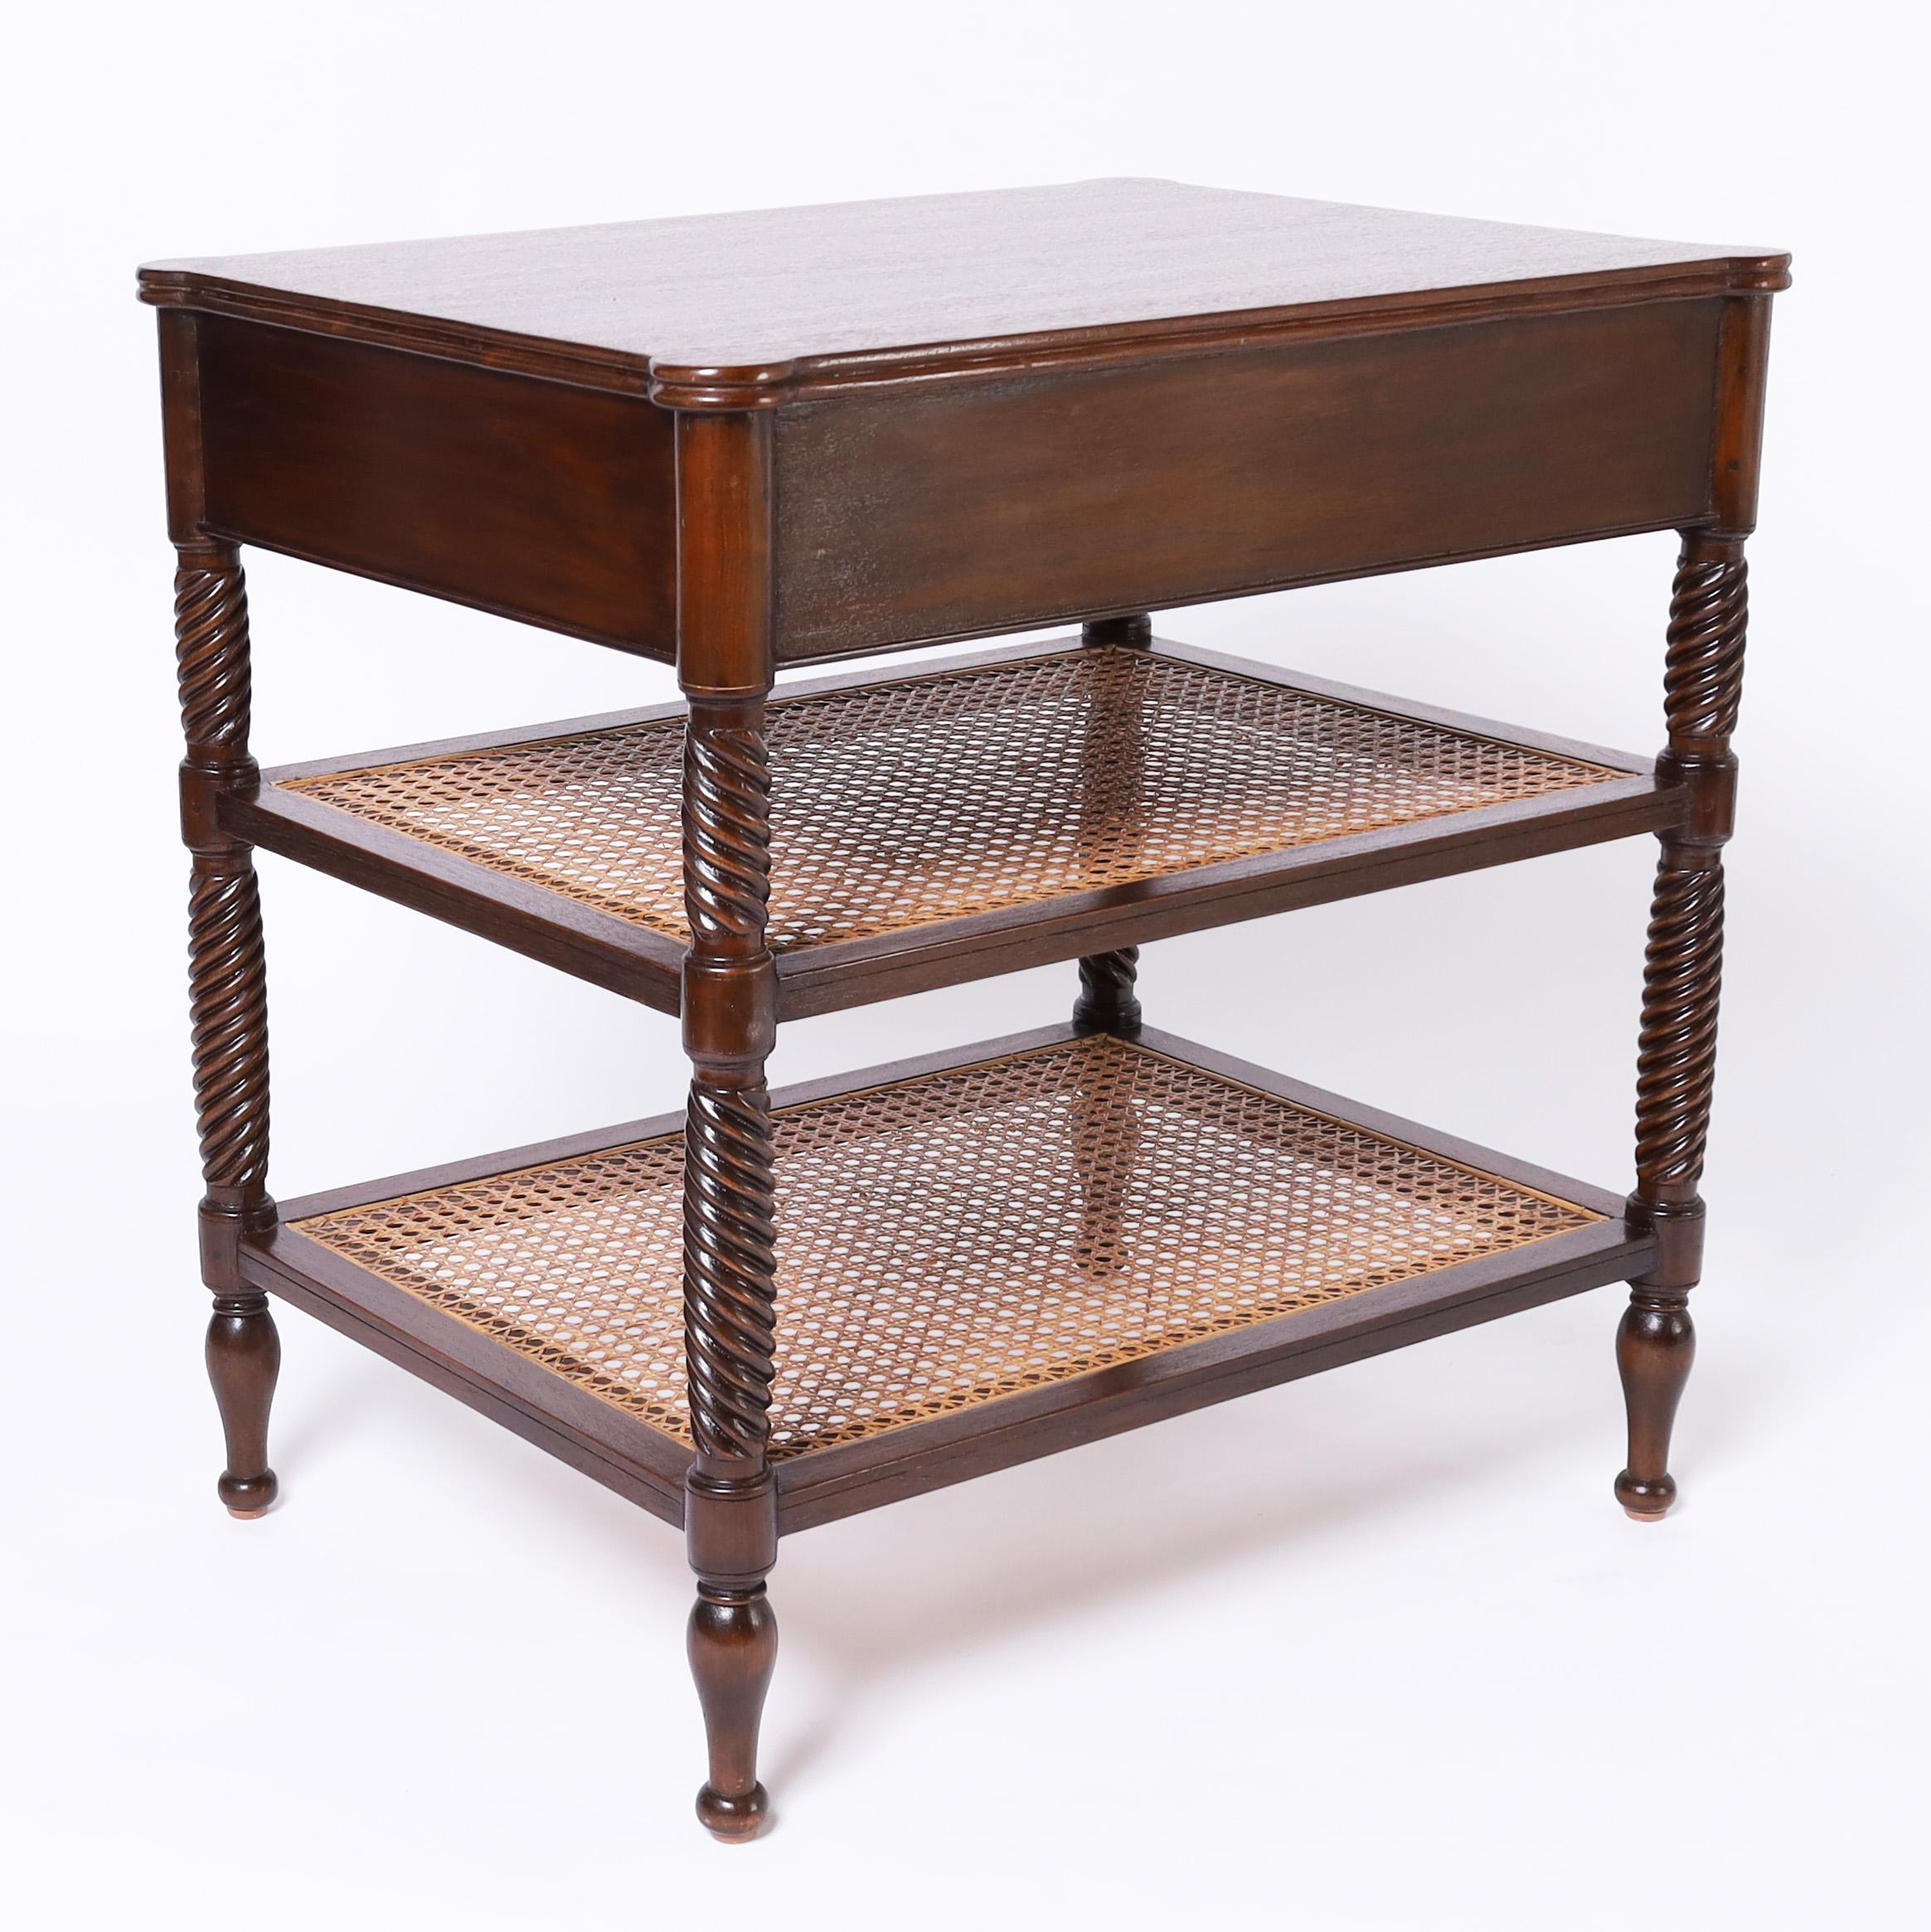 Hand-Crafted British Colonial Style Three Tiered Caned Stand or Table For Sale